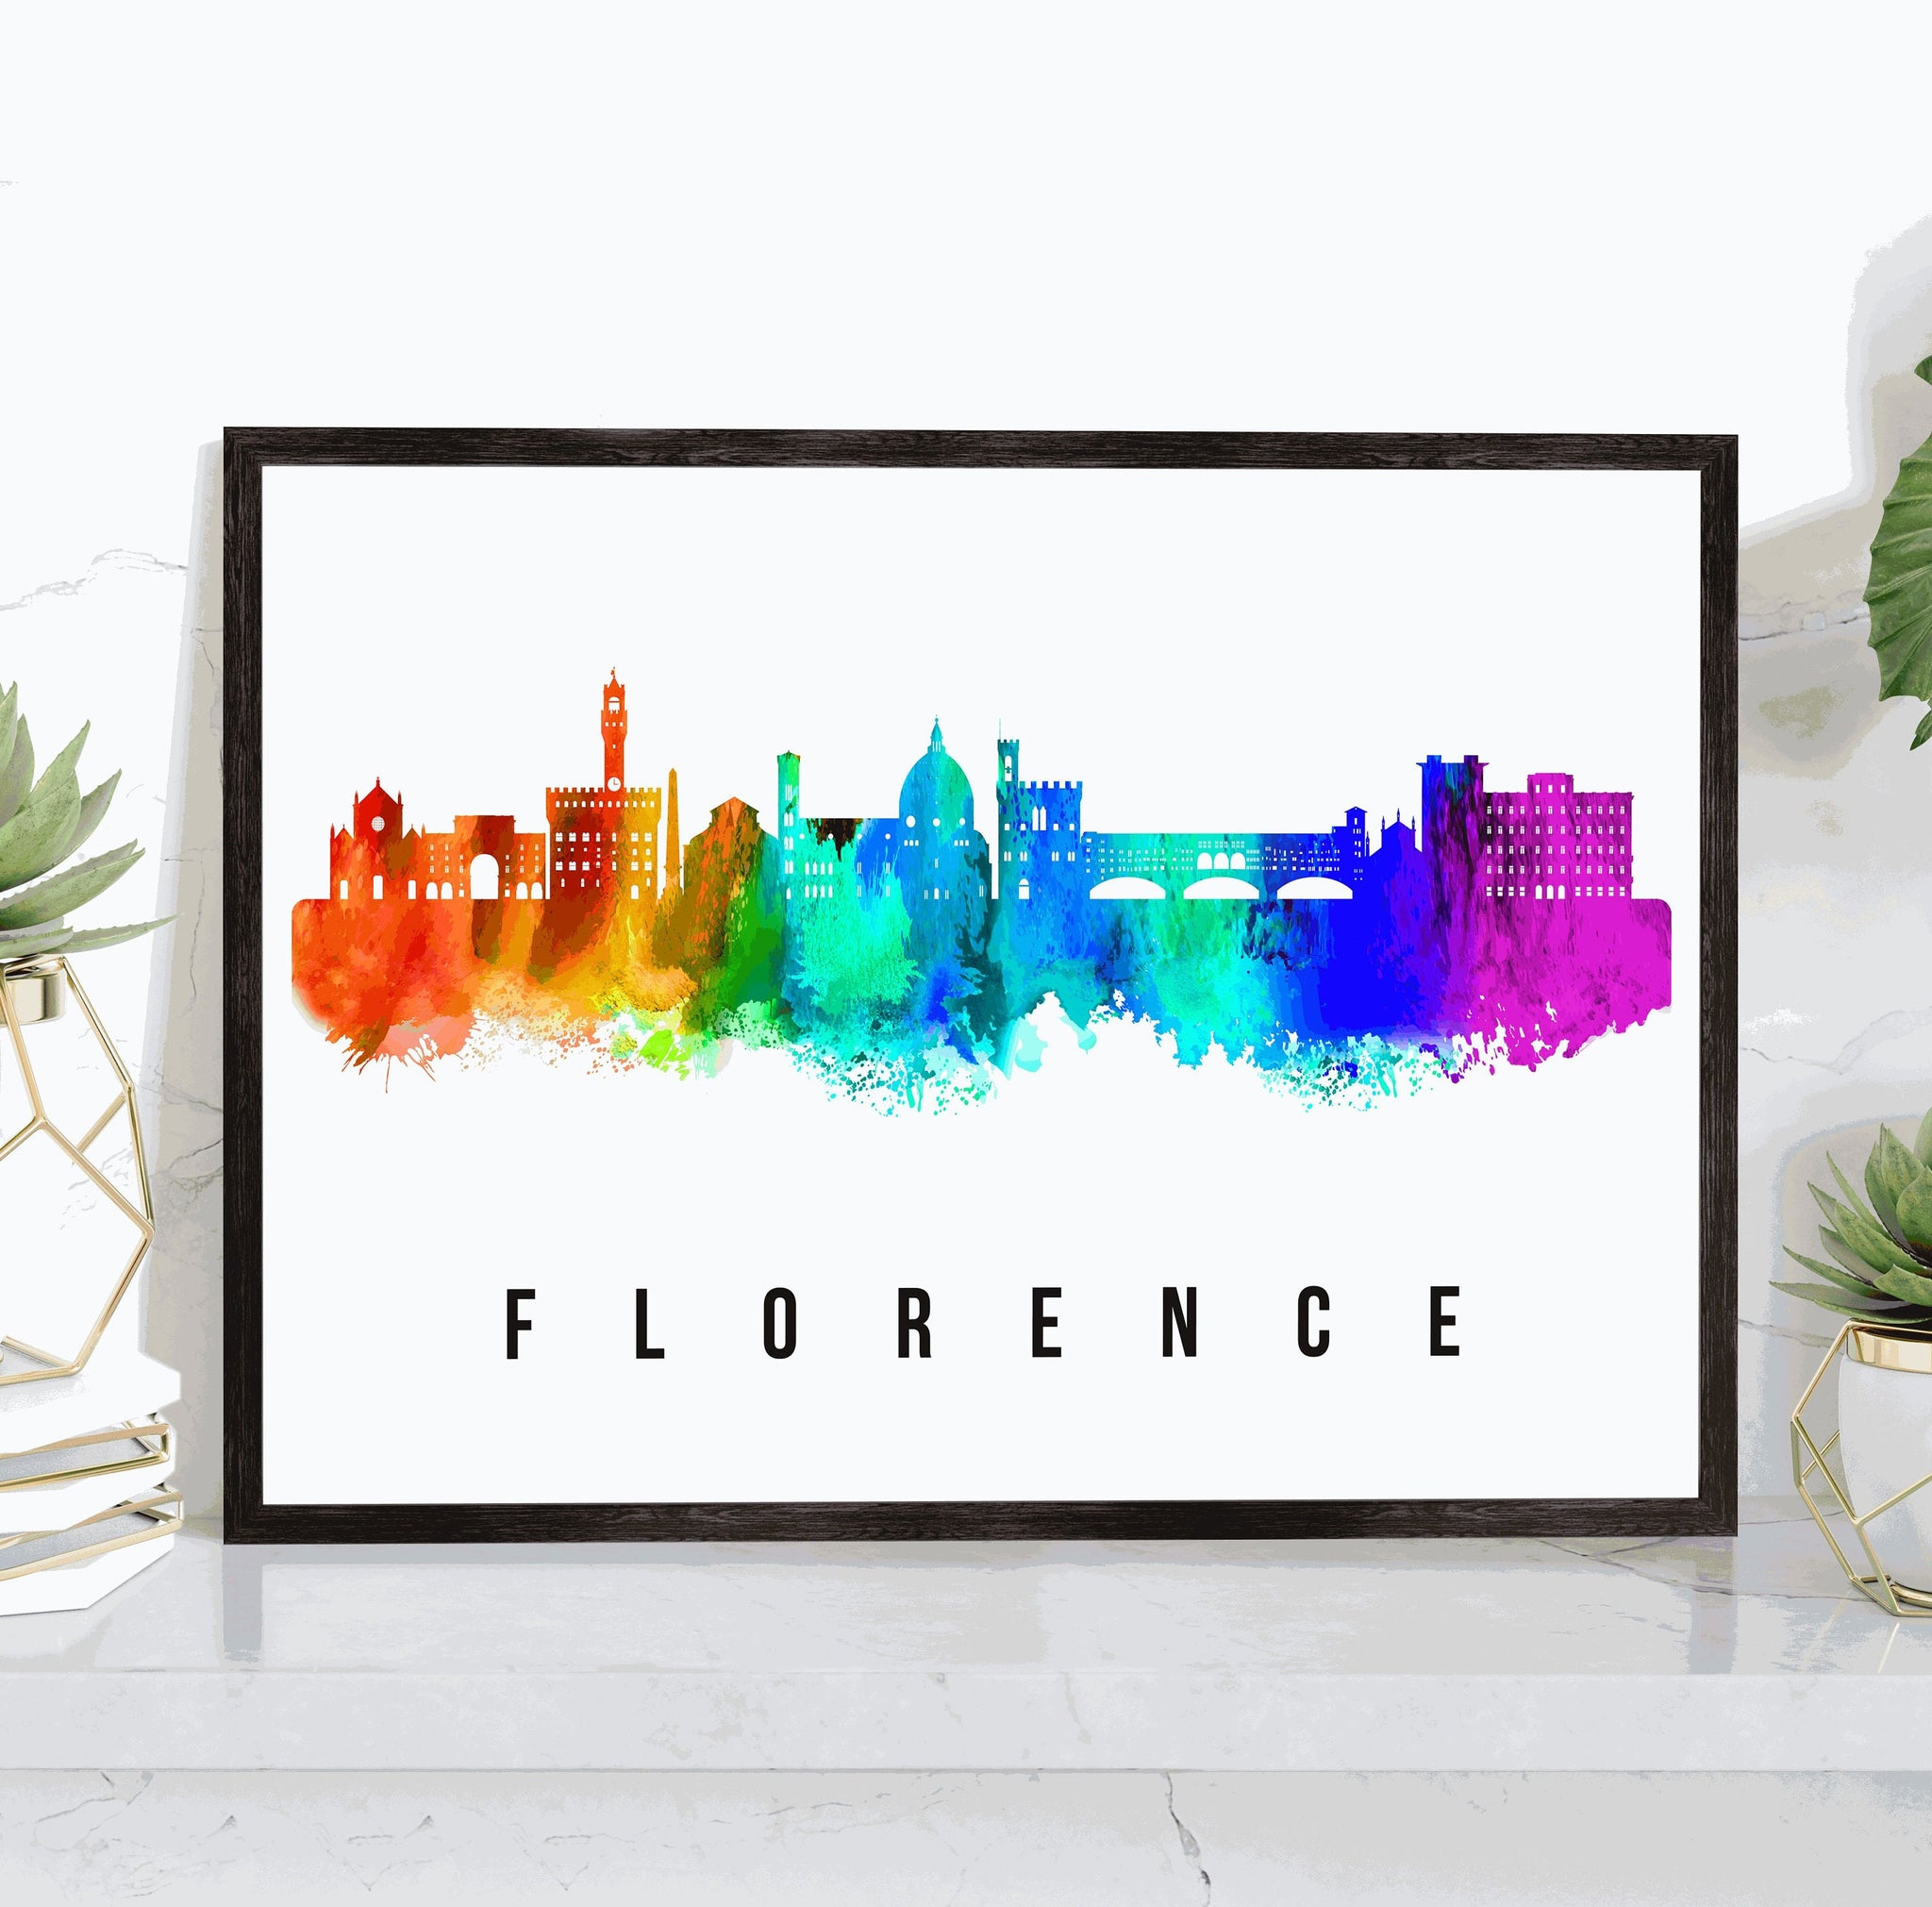 FLORENCE - ITALY Poster, Skyline Poster Cityscape and Landmark Florence City Illustration Home Wall Art, Office Decor